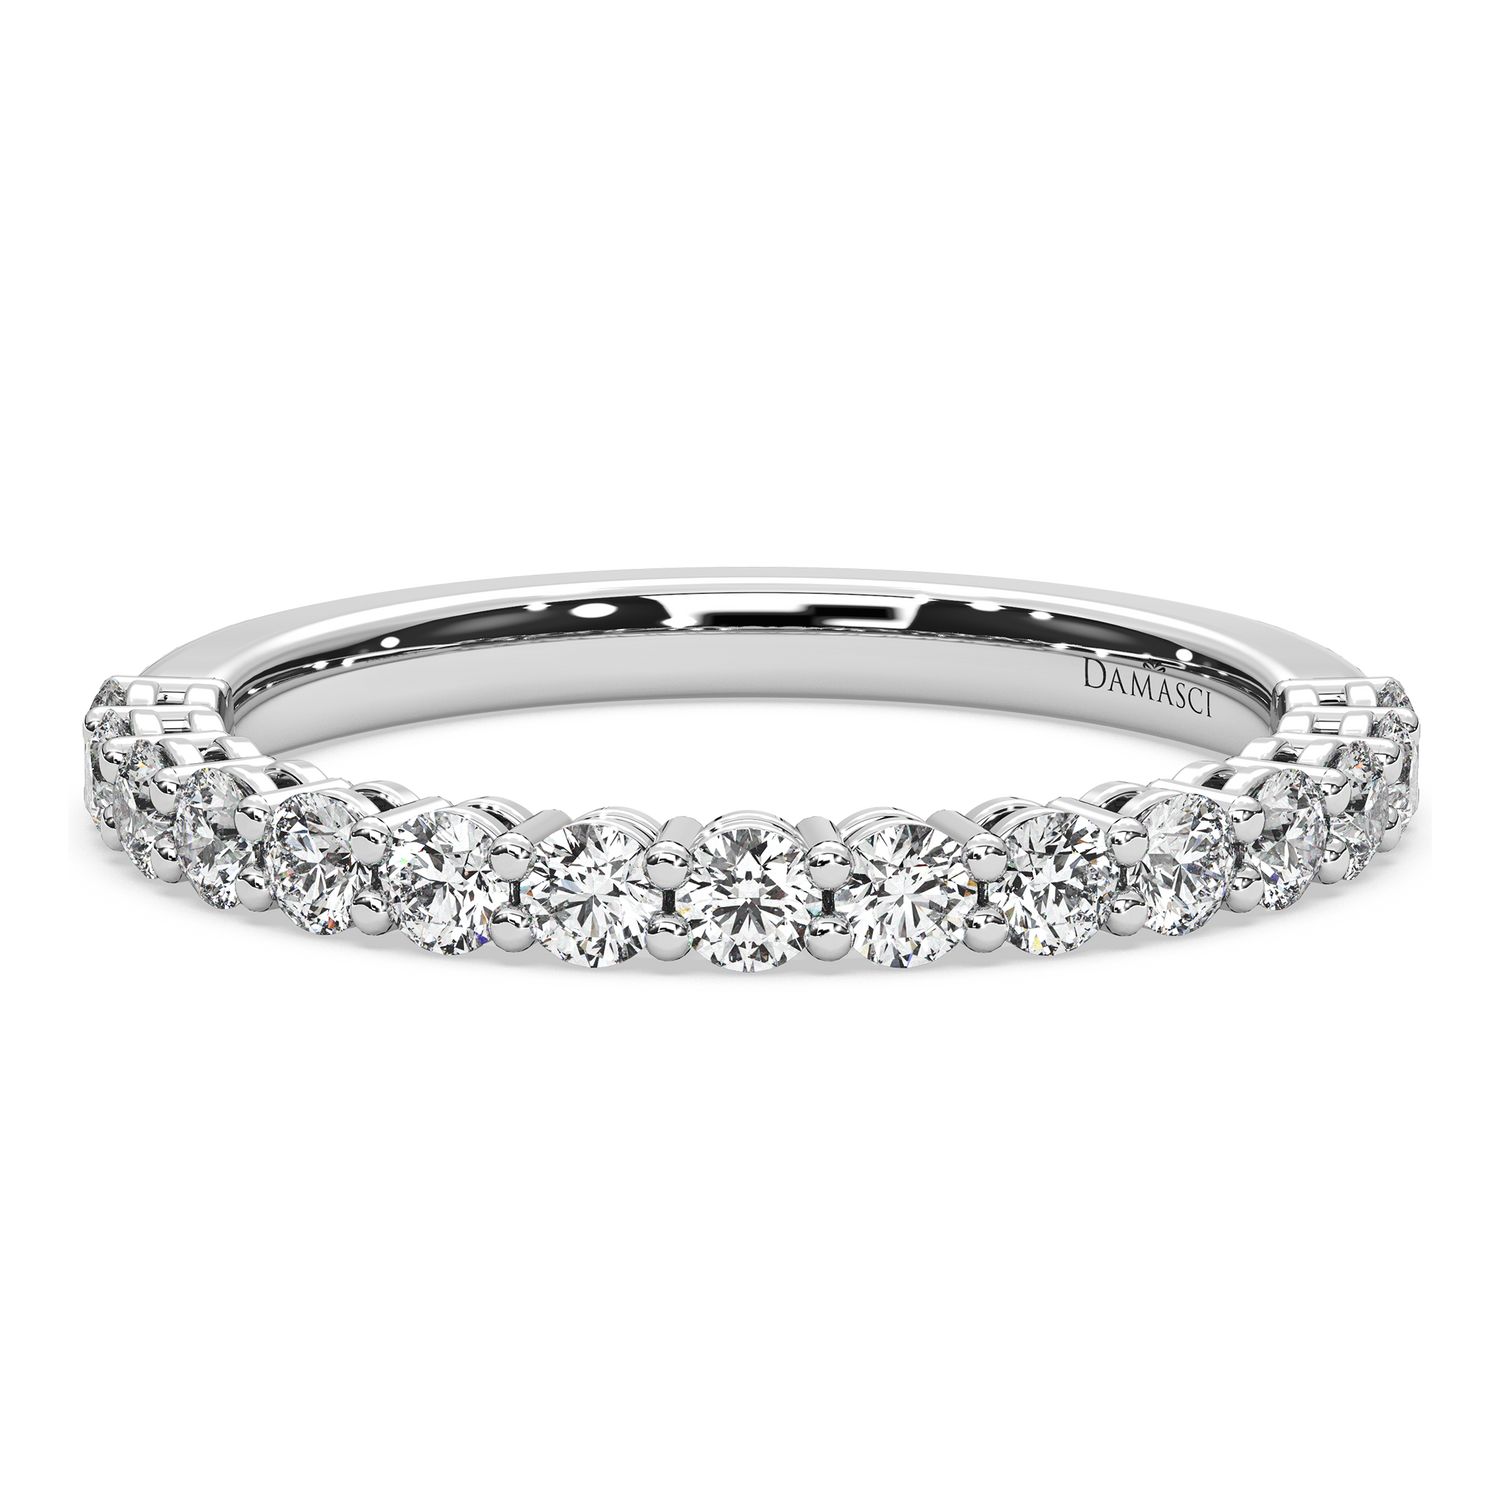 Rounds in Shared Claw Wedding Ring